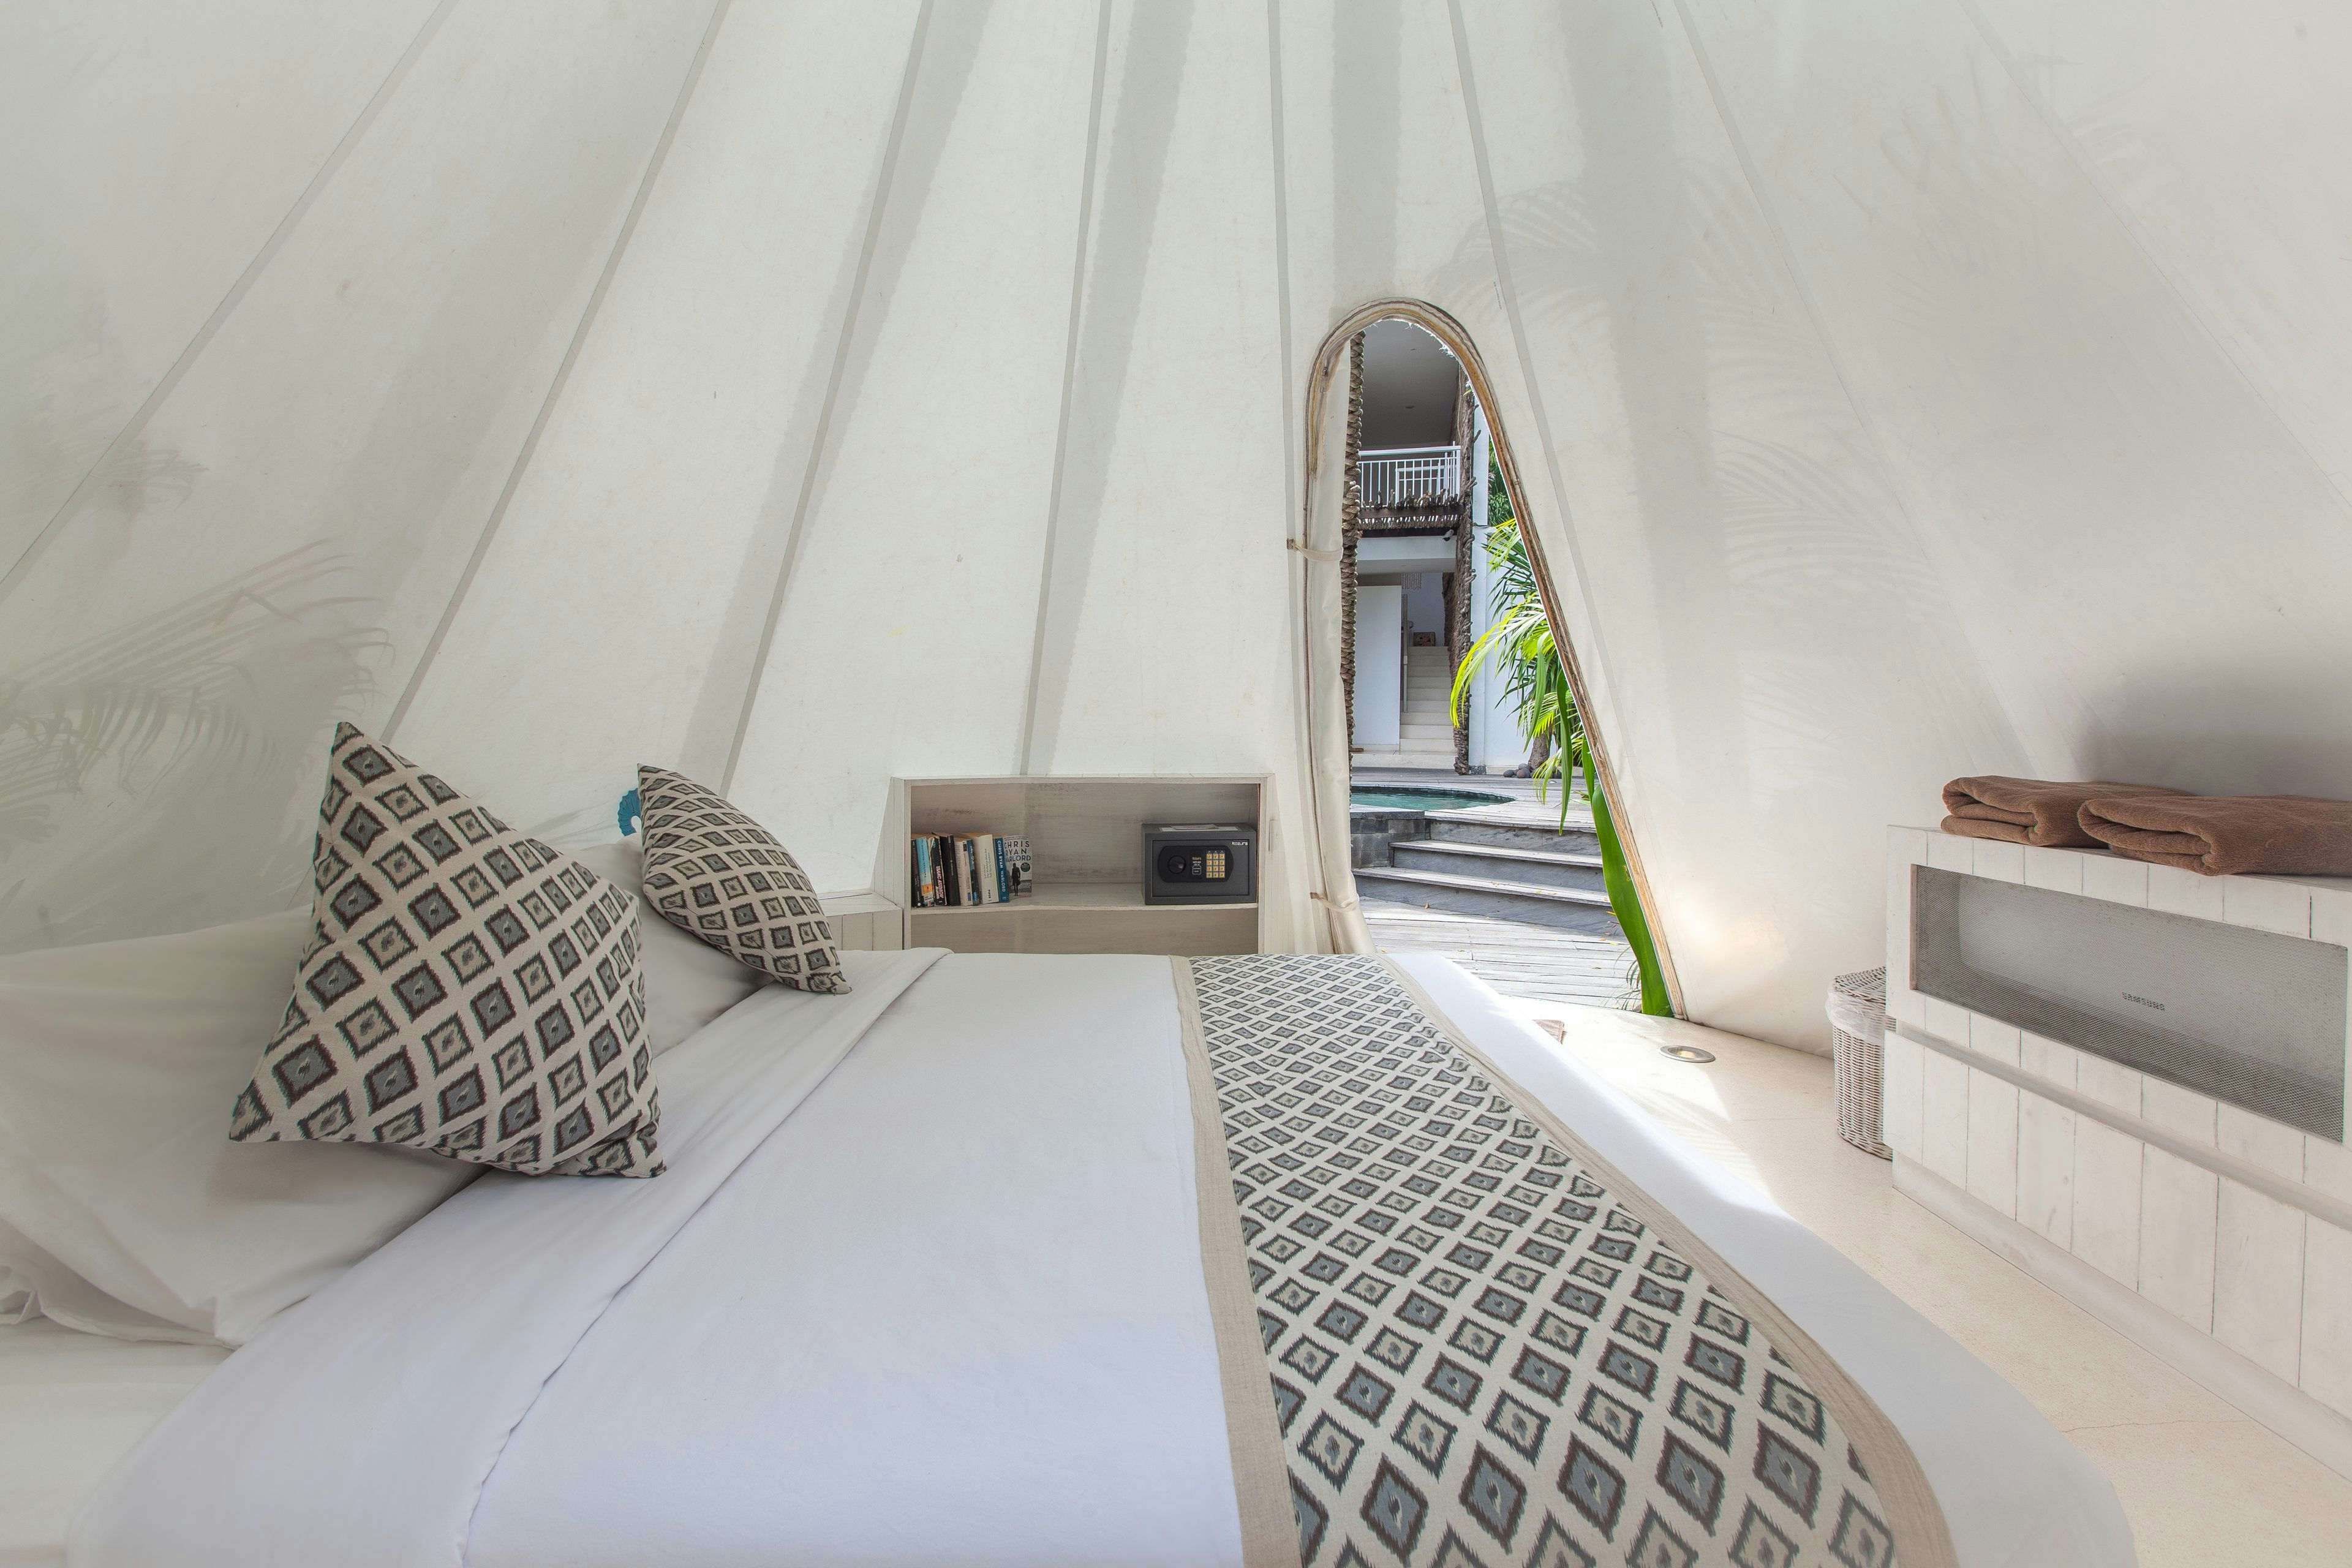 Tipi double room